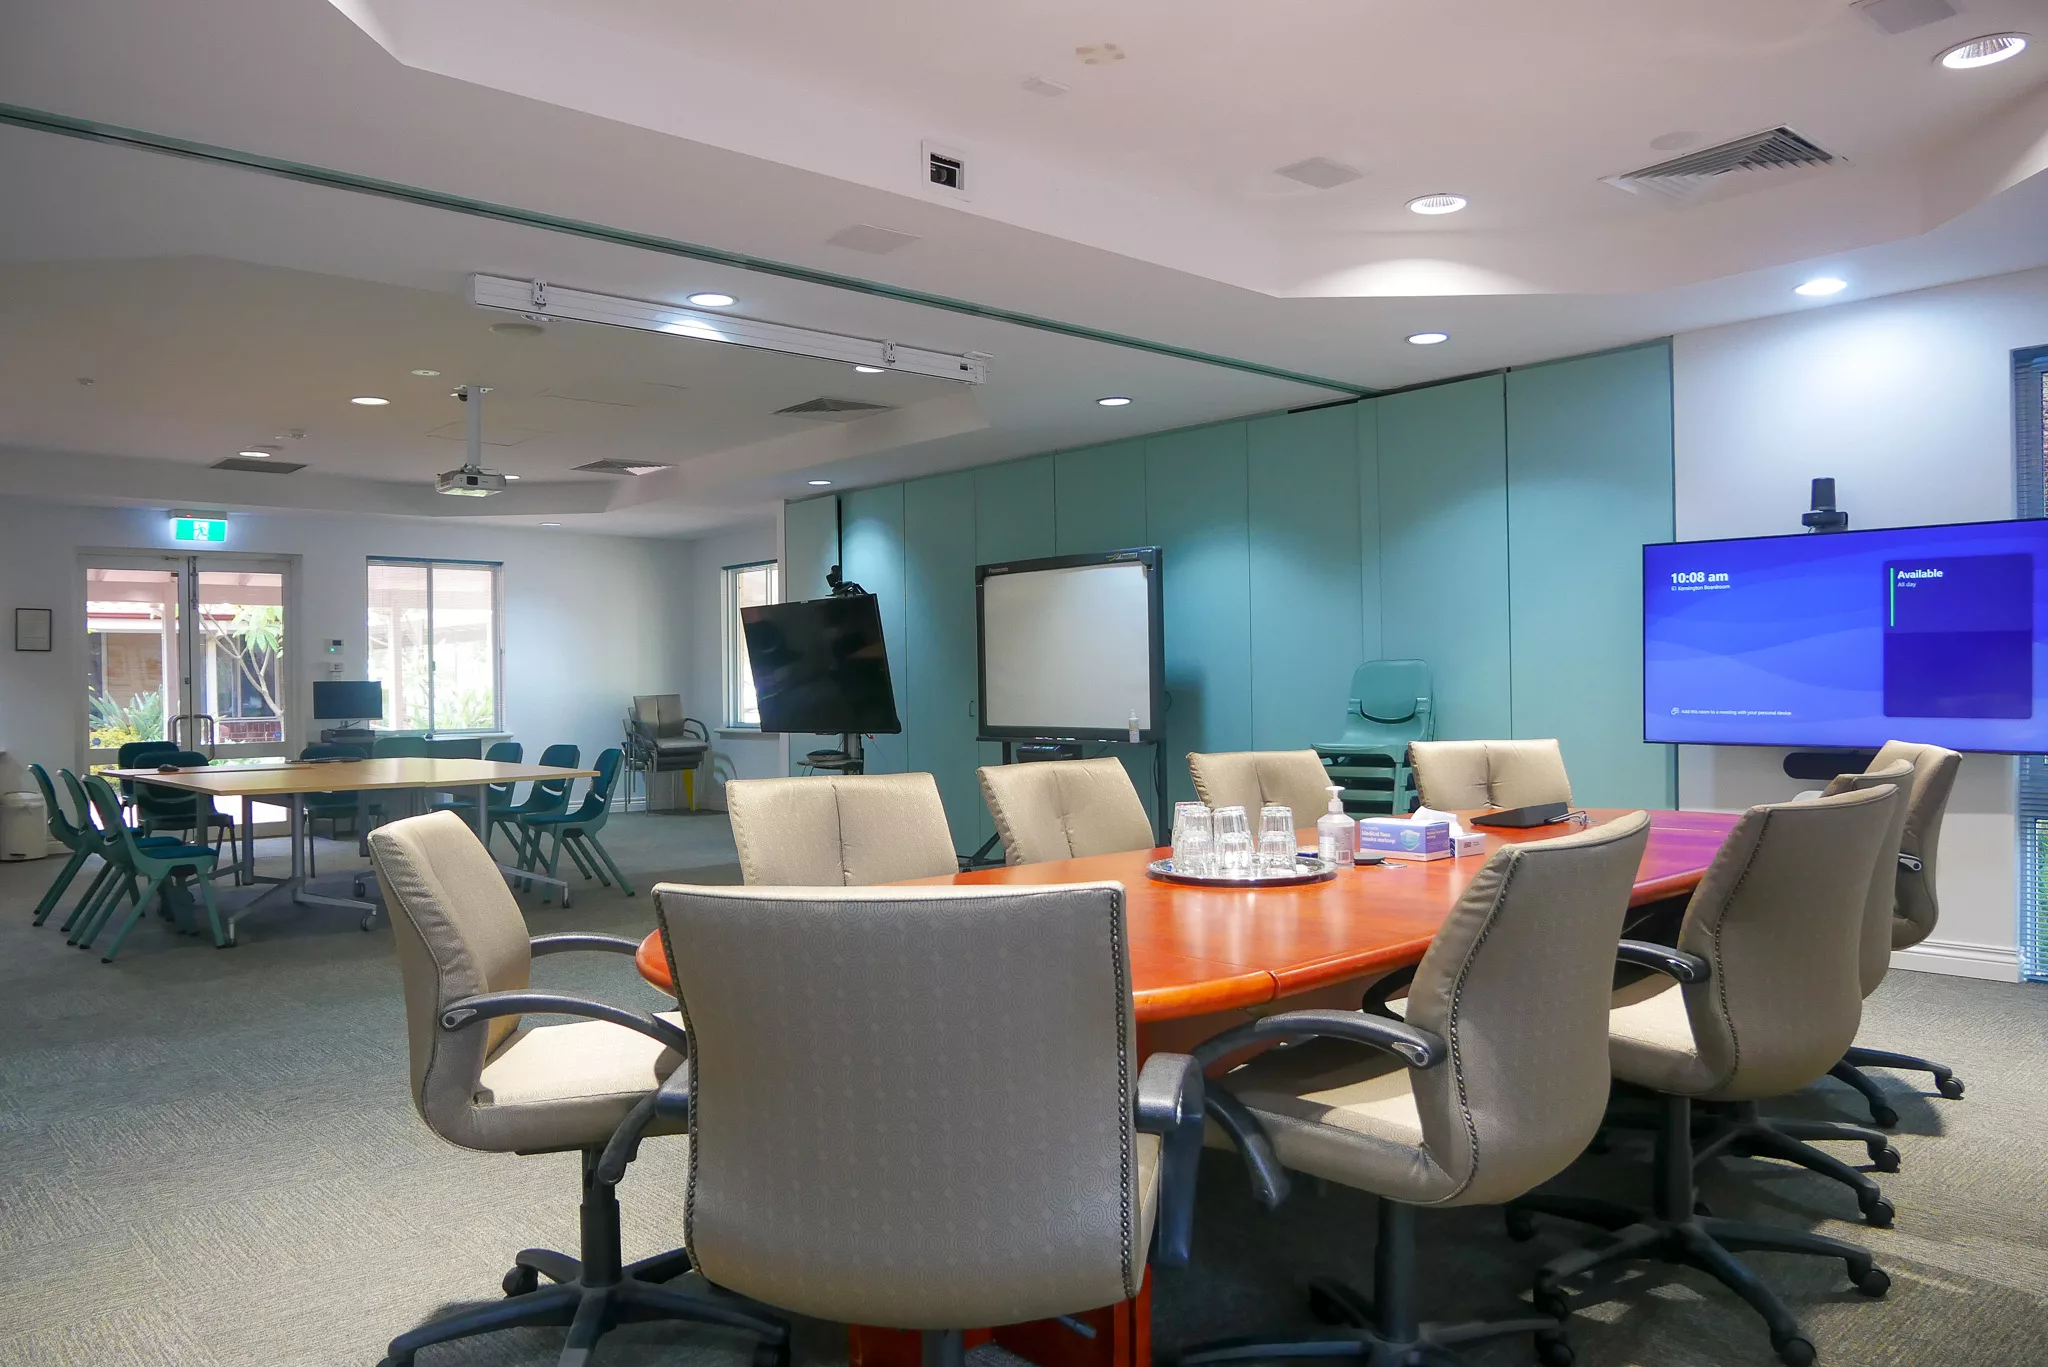 Ngala-Kensington-combined-meeting-and-board-room-space-2